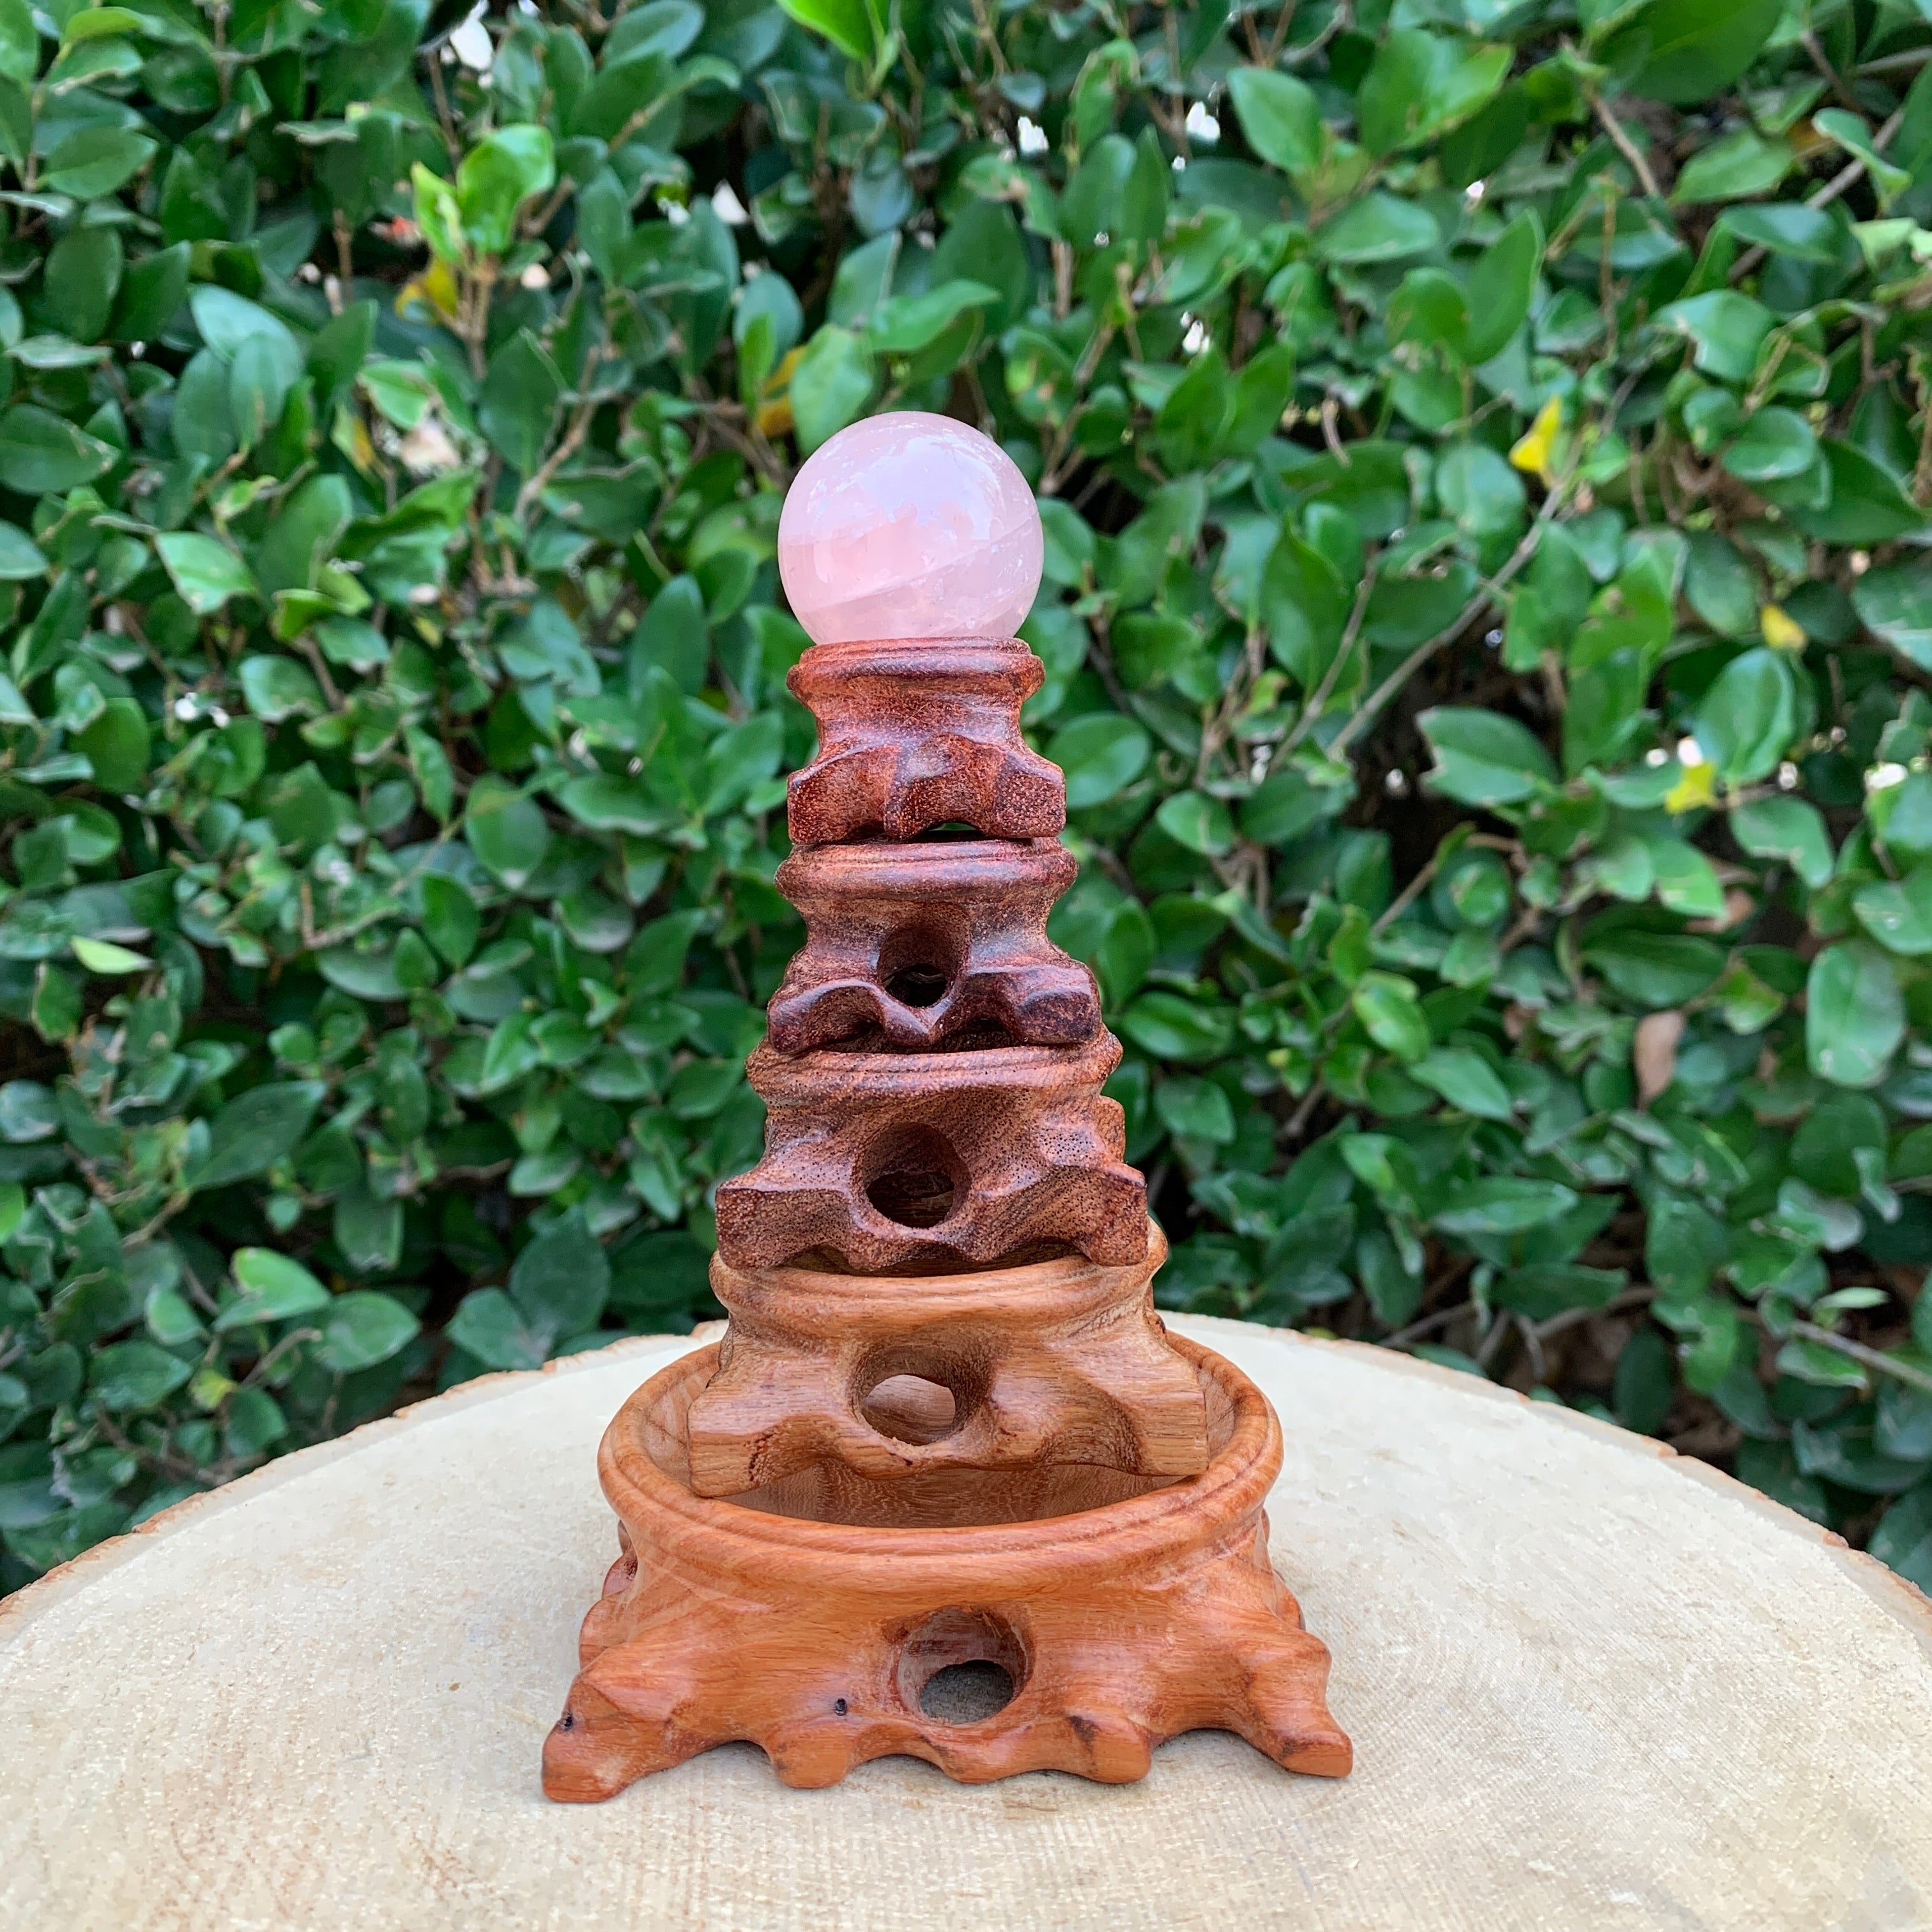 Wooden Square Sphere Ball Base stand Made in China